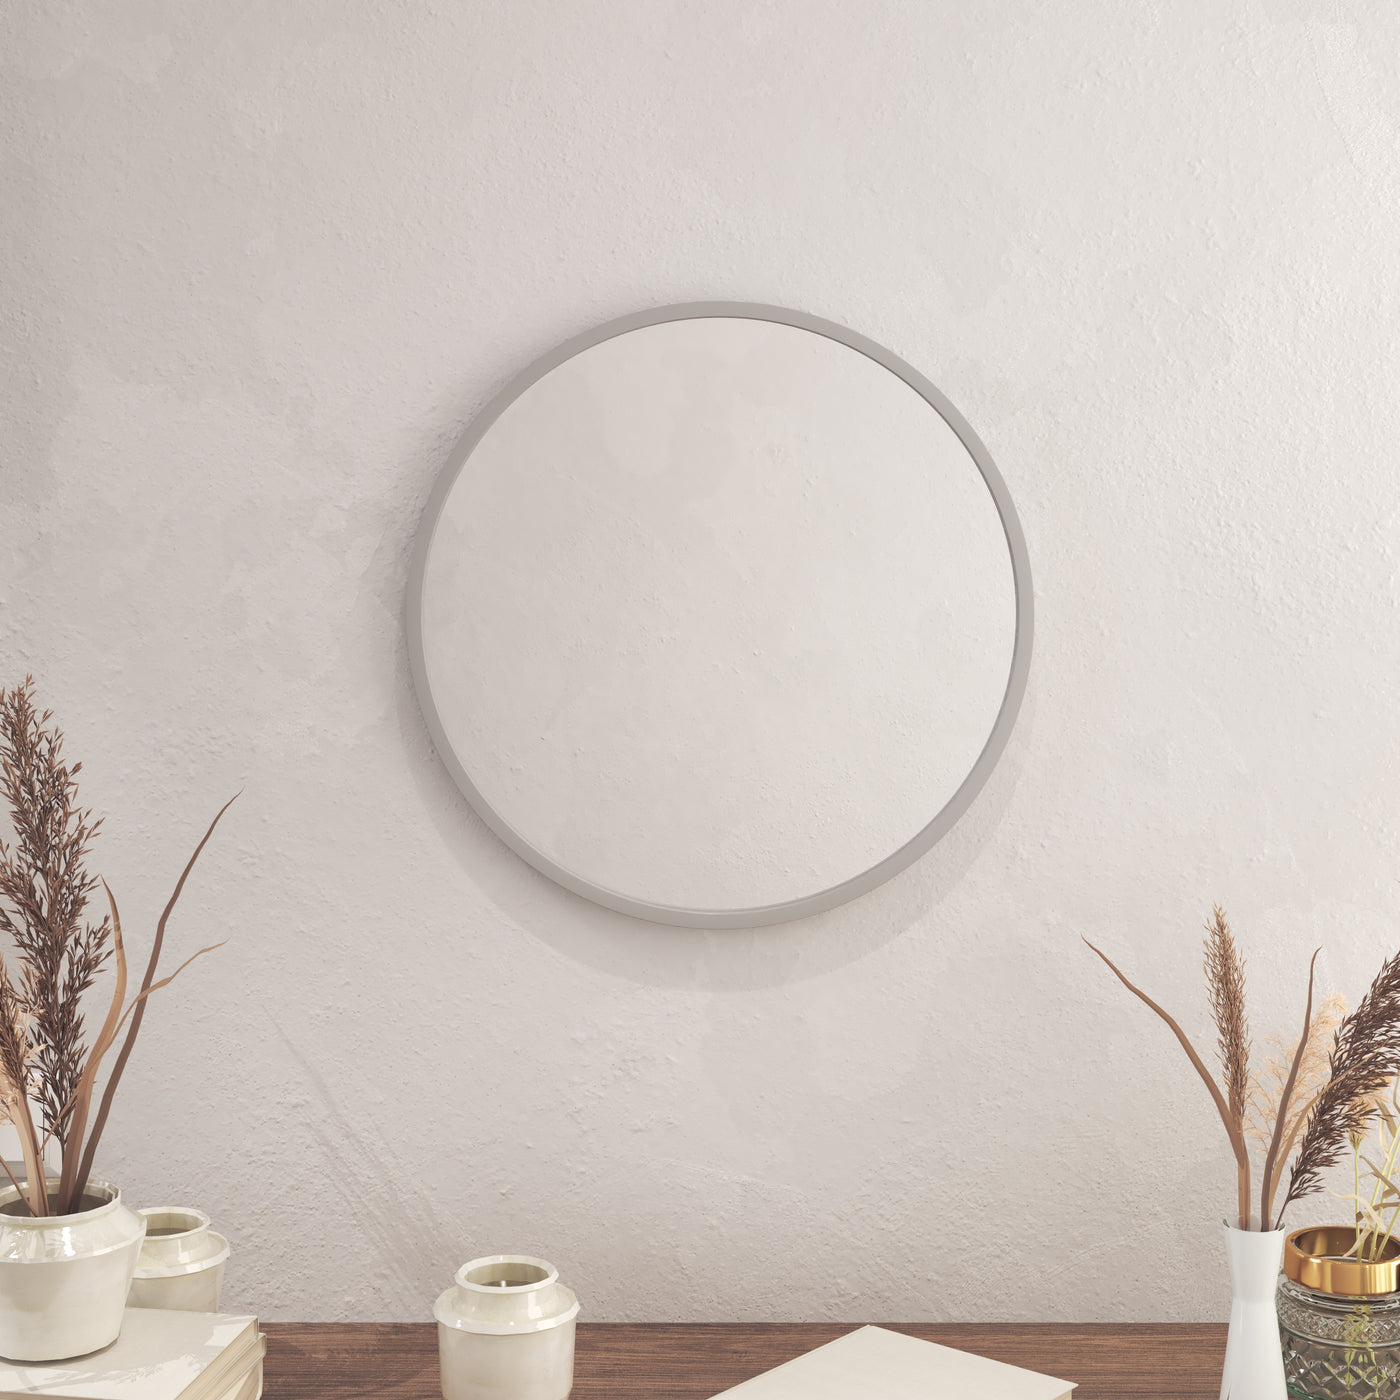 20" Round Wall Mirror for Entryways, Washrooms and Living Rooms